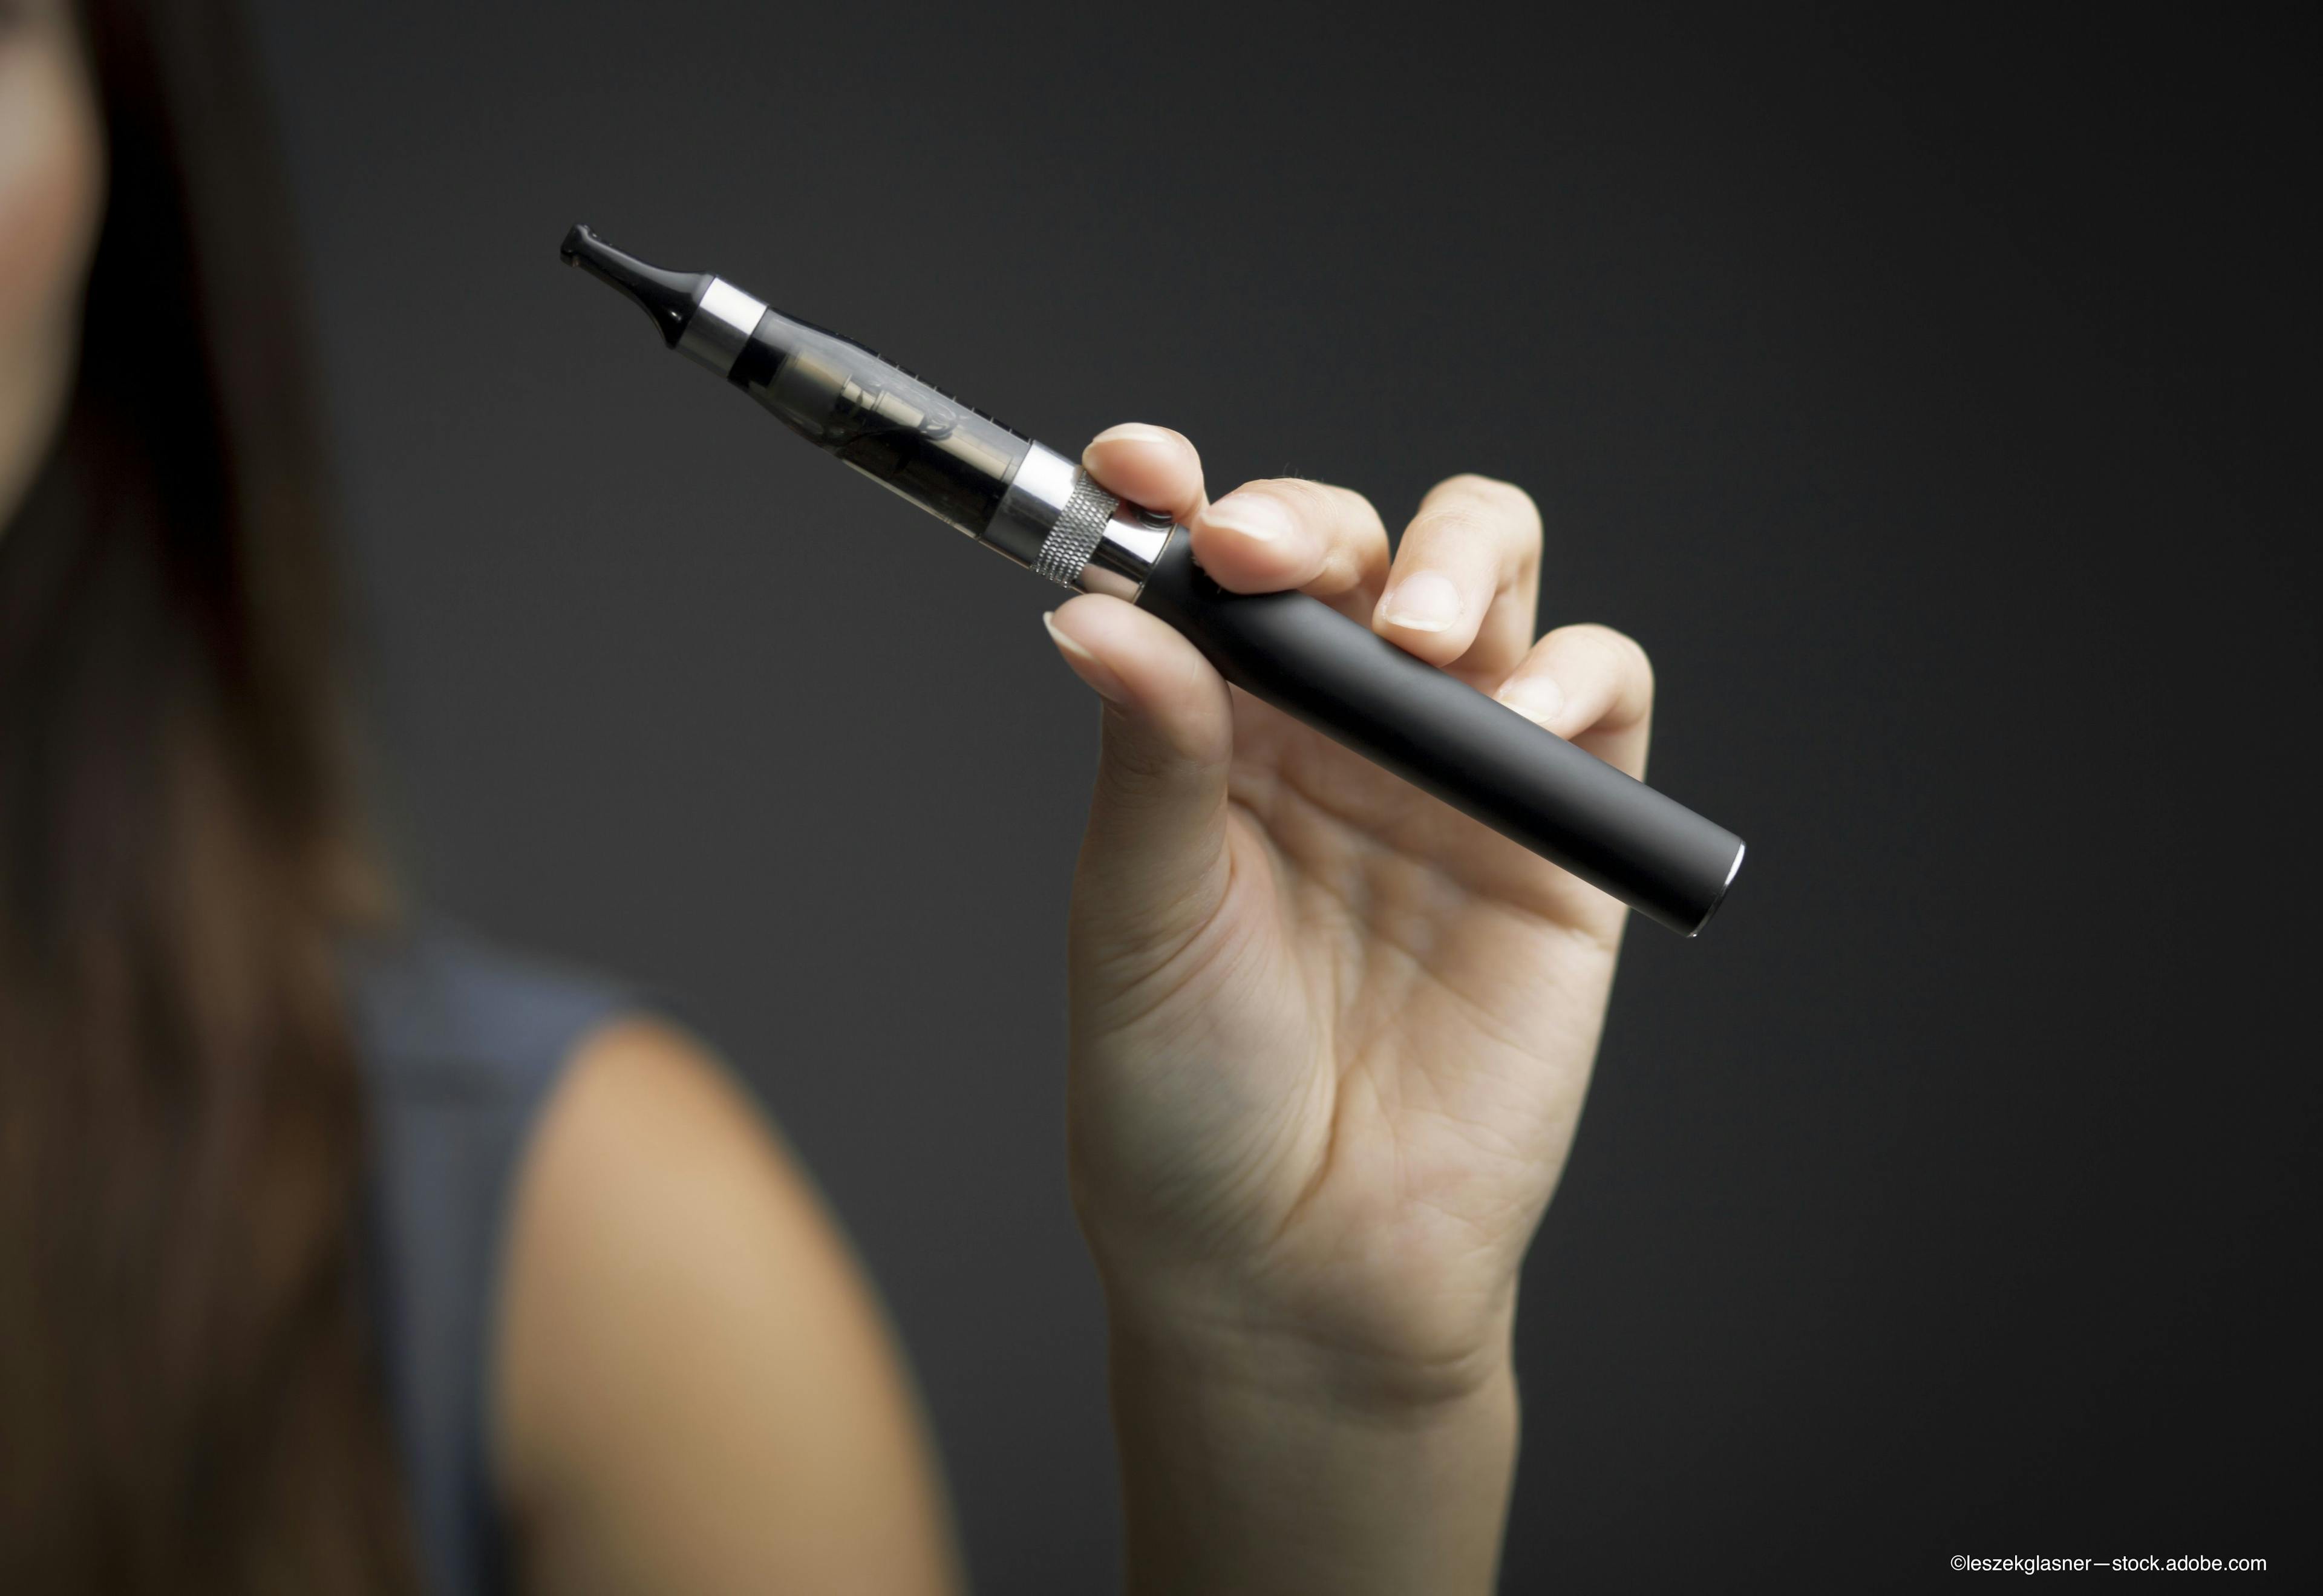 Fewer ocular symptoms linked to e-cigarettes than traditional cigarettes